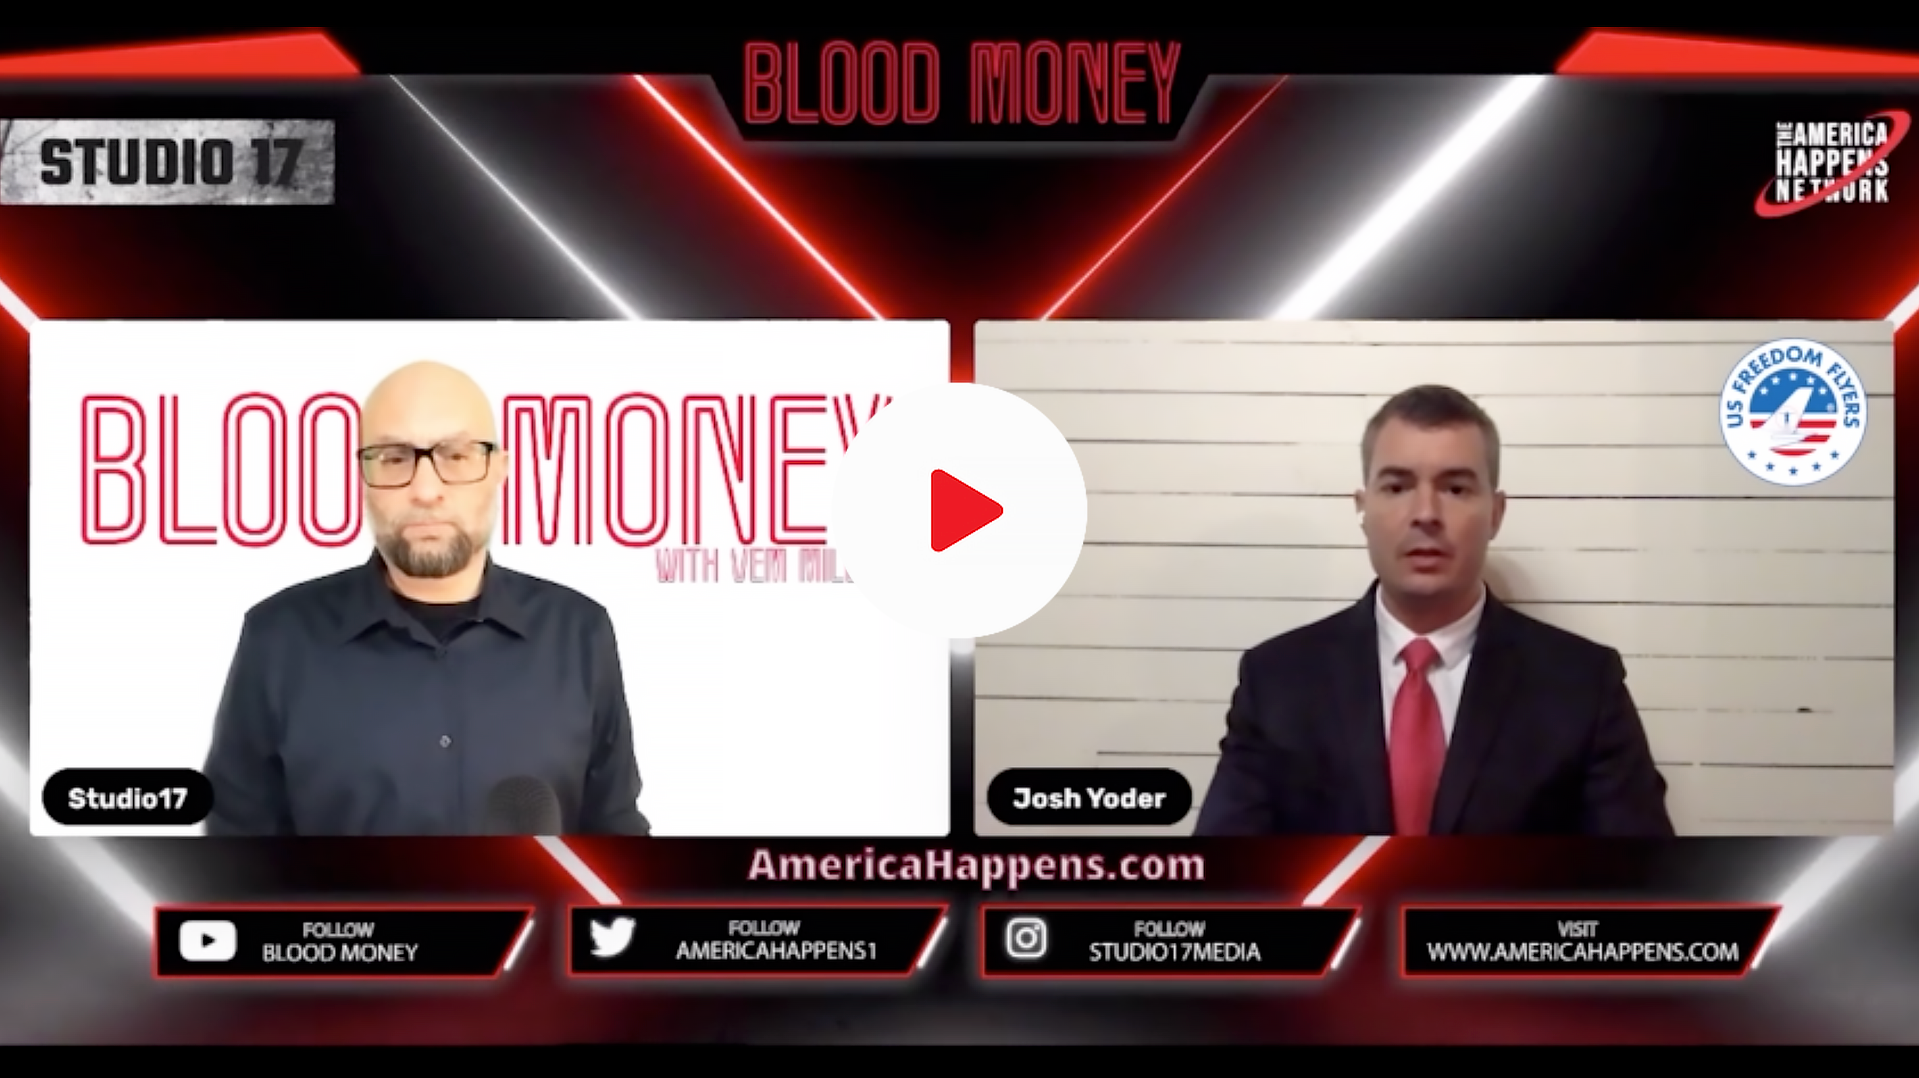 Blood Money Episode 36 with Josh Yoder "How the FAA has violated public trust"